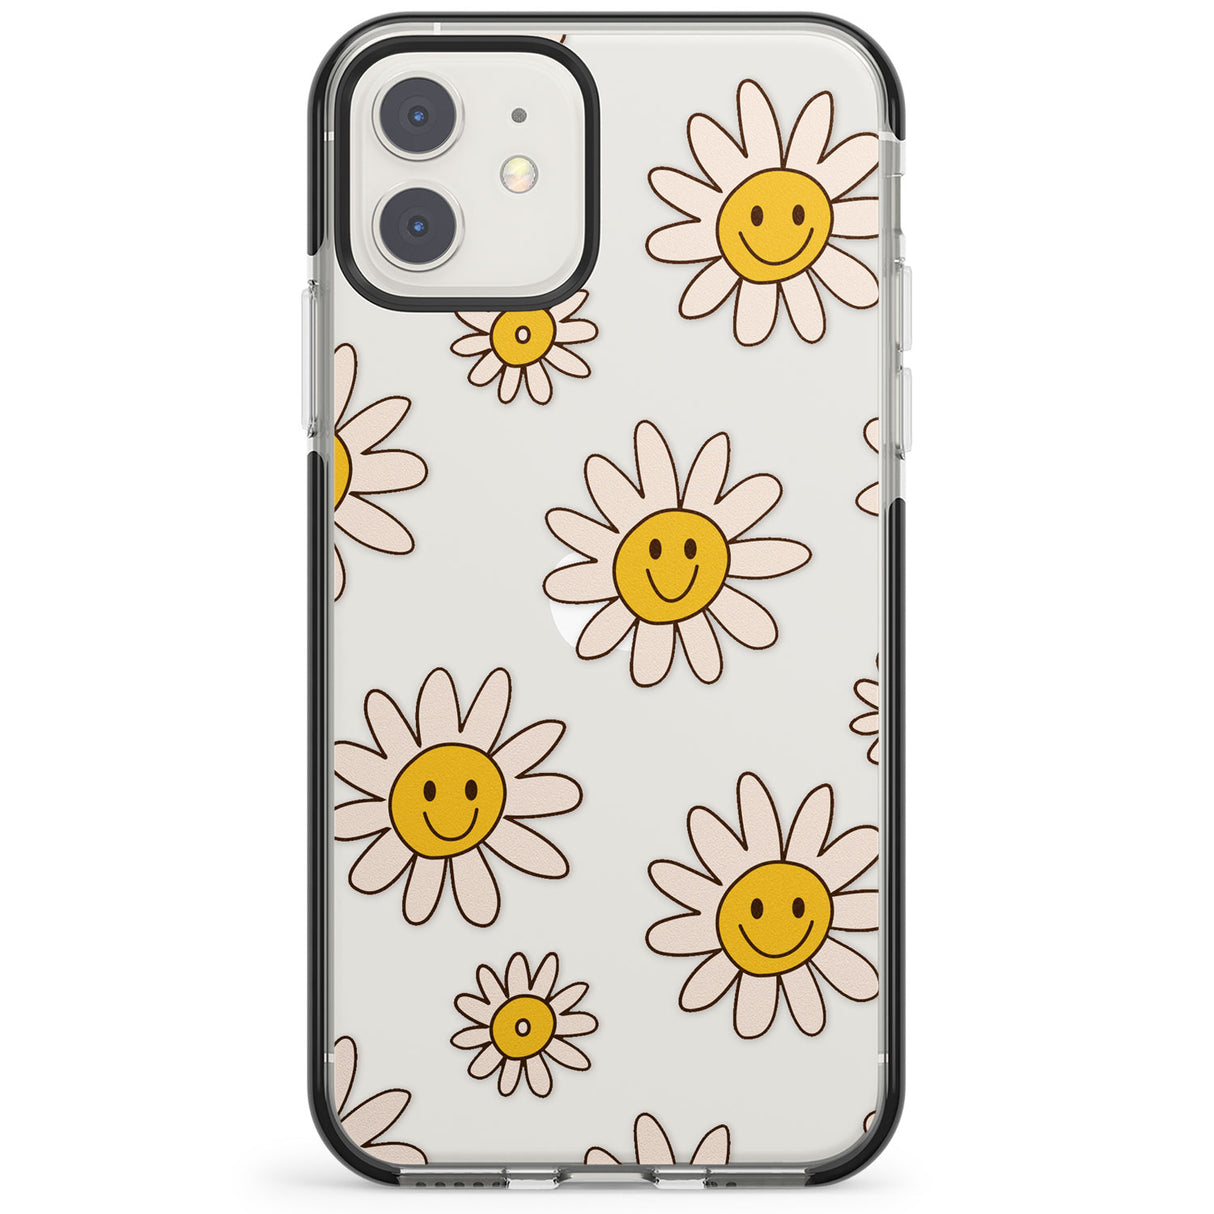 Daisy Faces Impact Phone Case for iPhone 11, iphone 12